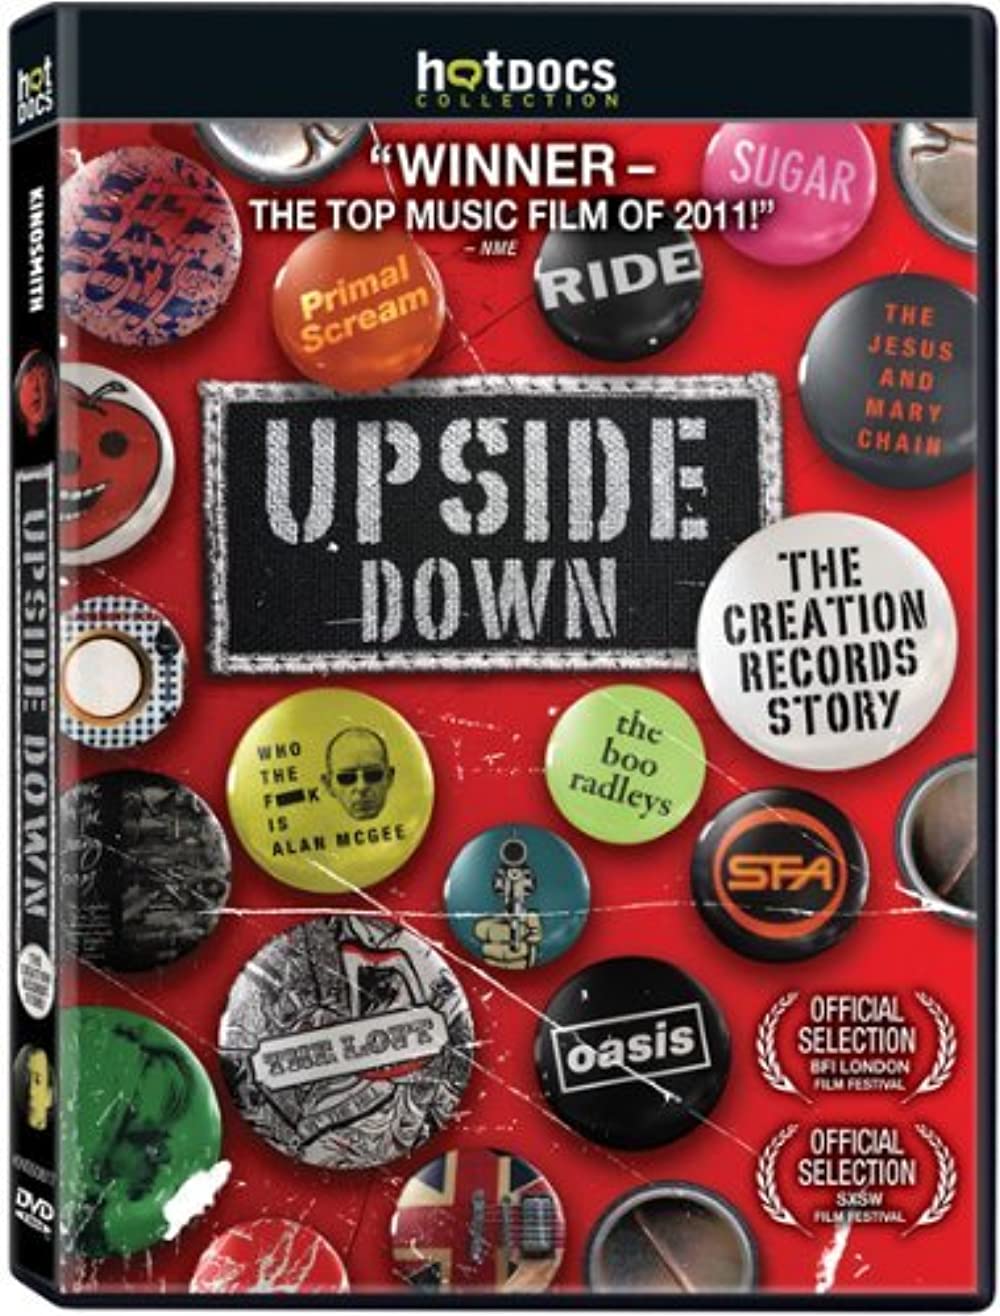 Download Upside Down: The Creation Records Story Movie | Upside Down: The Creation Records Story Dvd